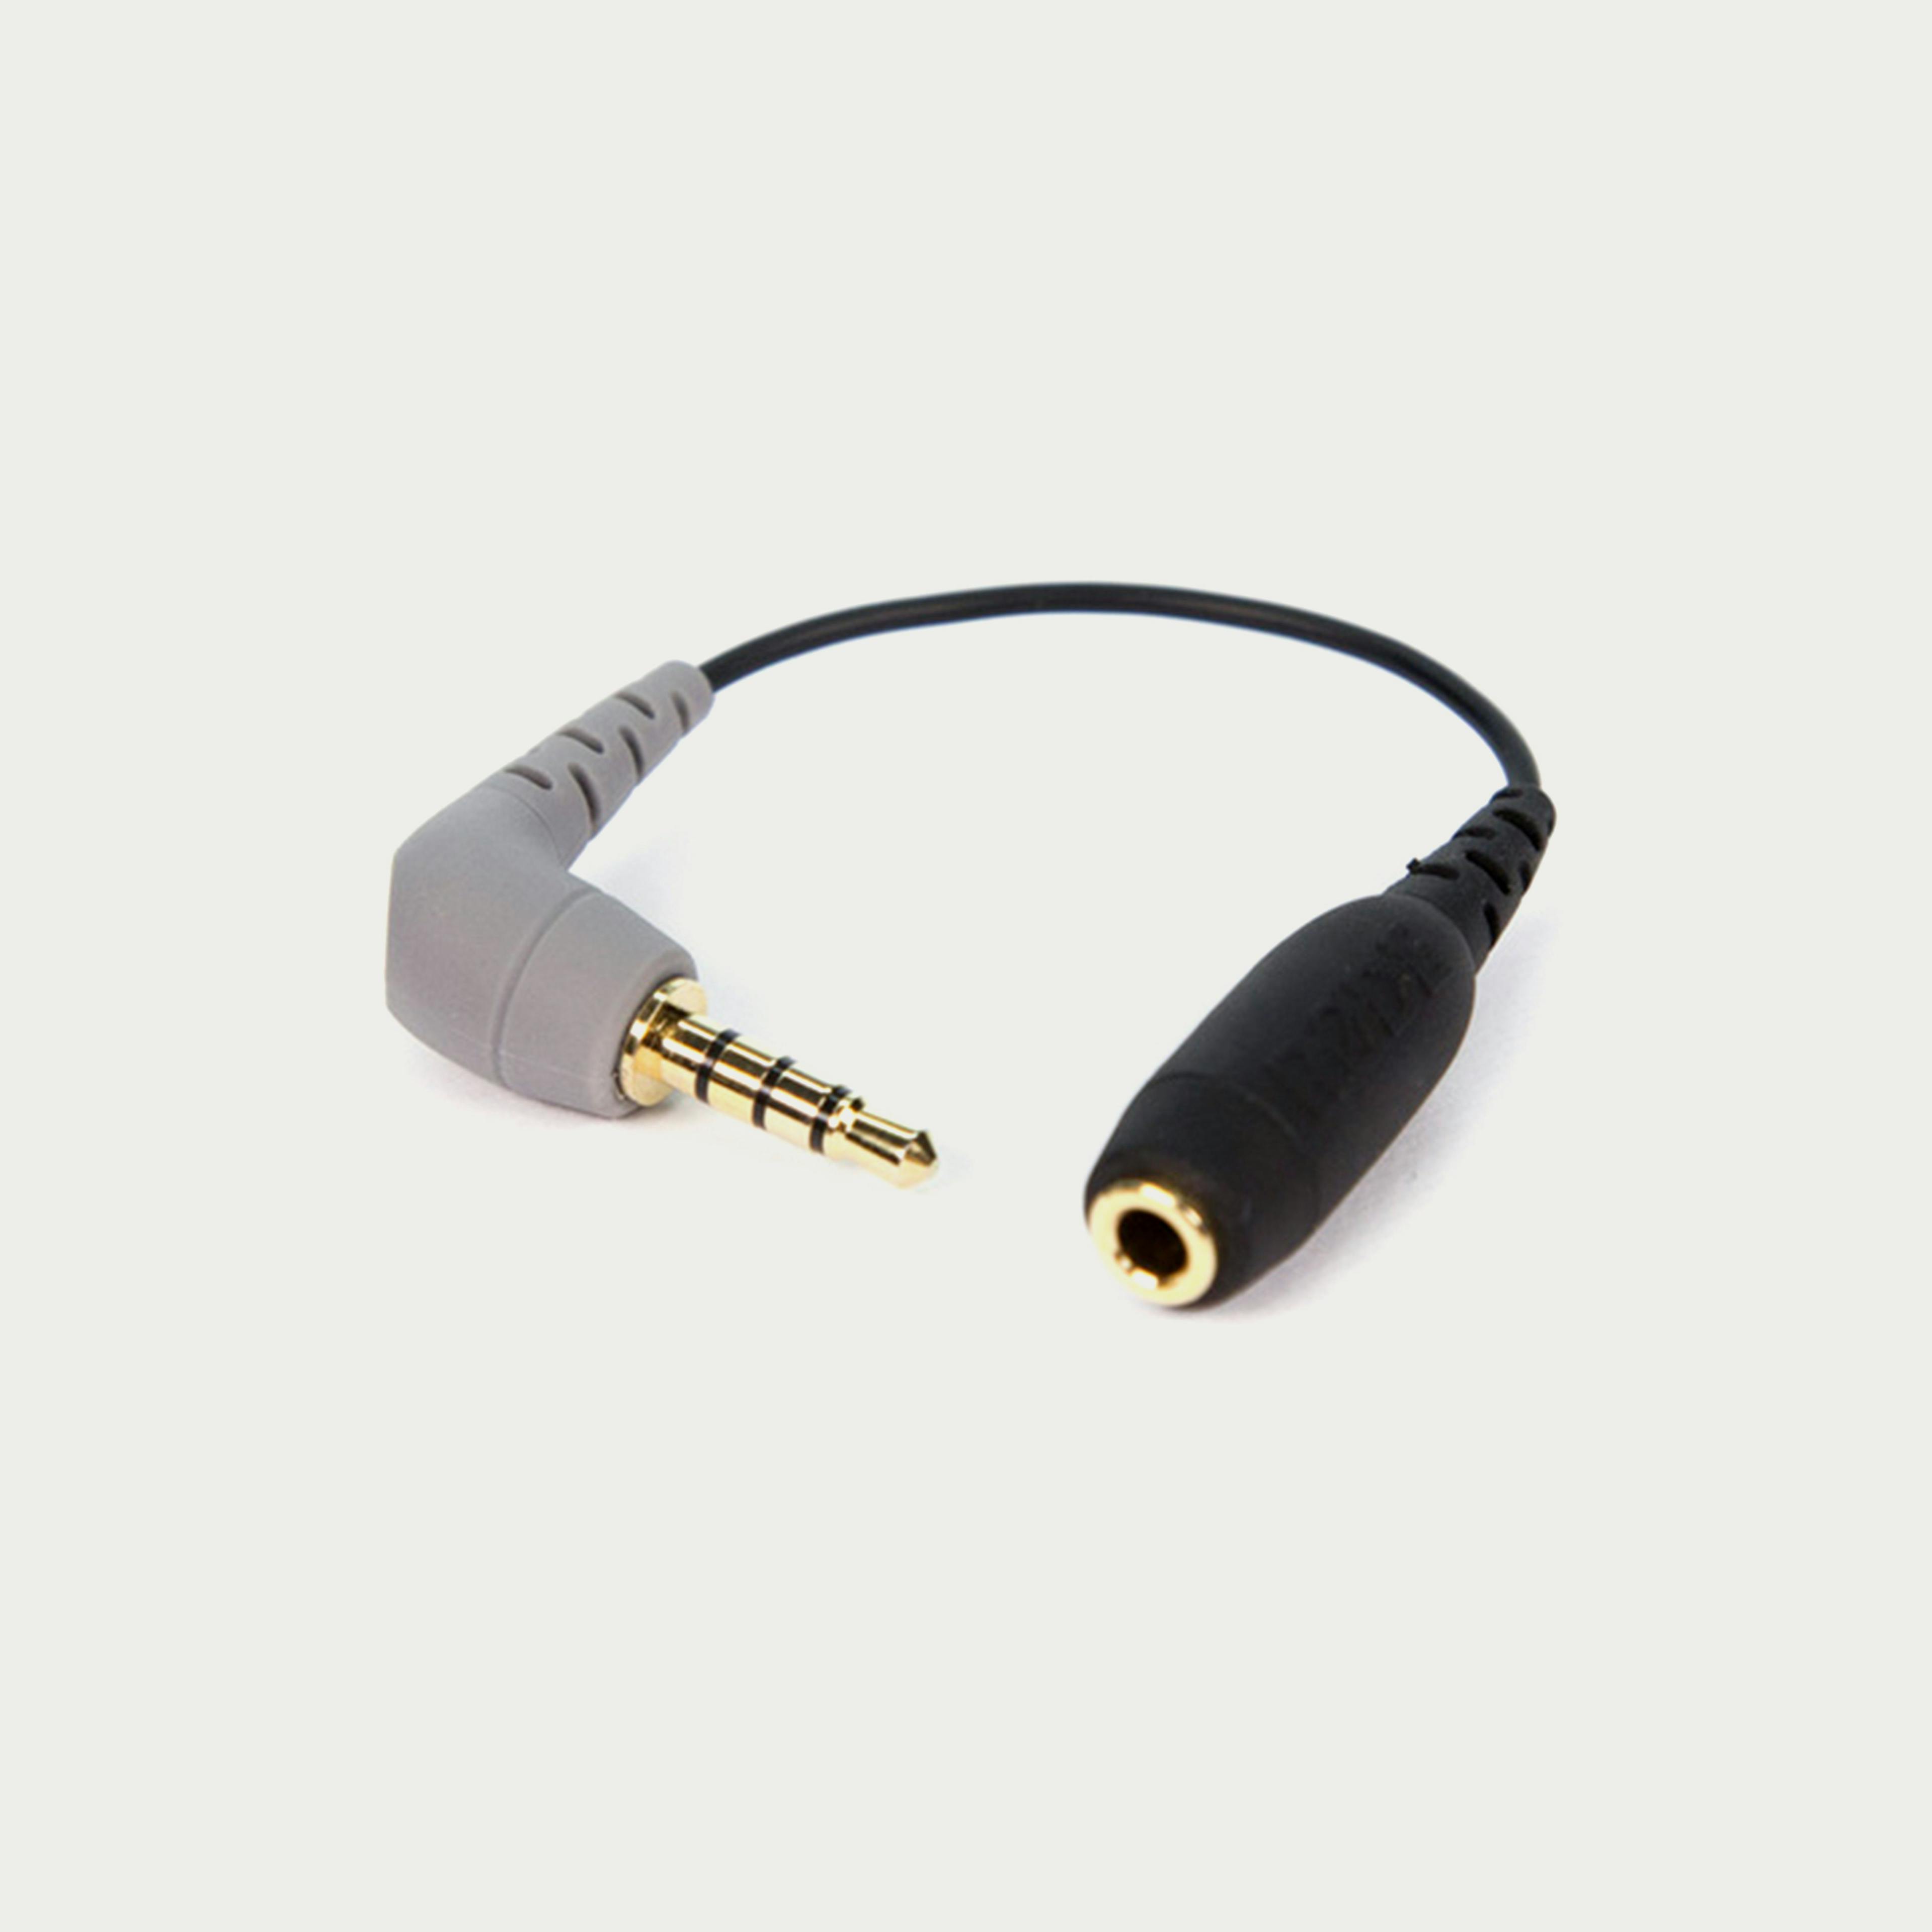 SC4 - 3.5mm Female TRS to Male TRRS Adapter Cable